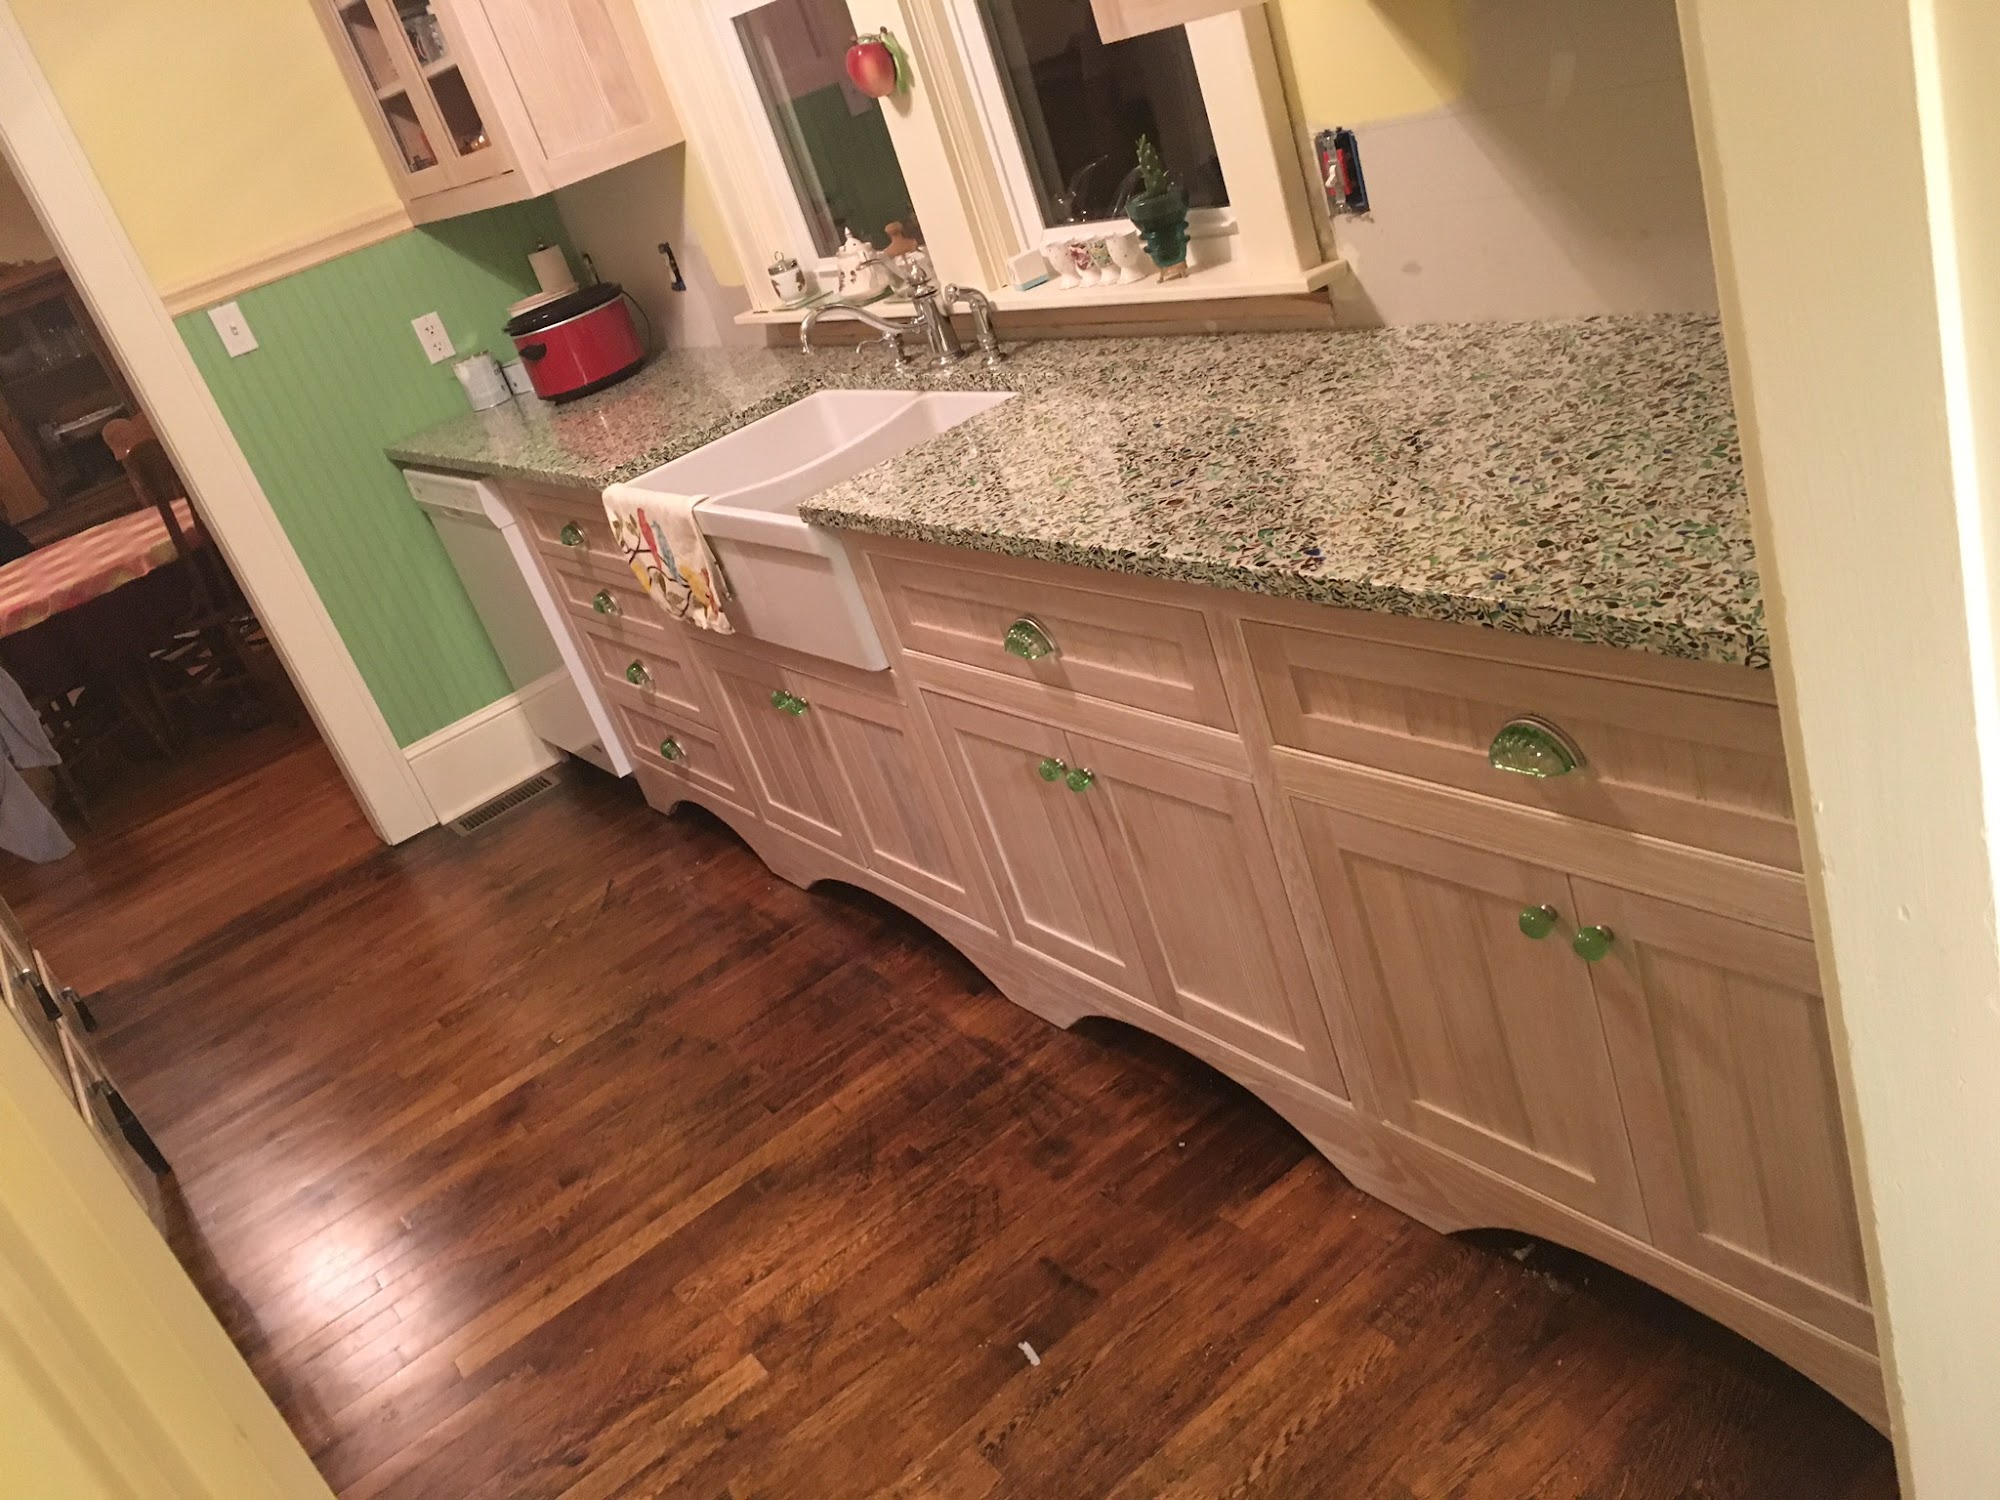 Wilkes Cabinetry & Furniture